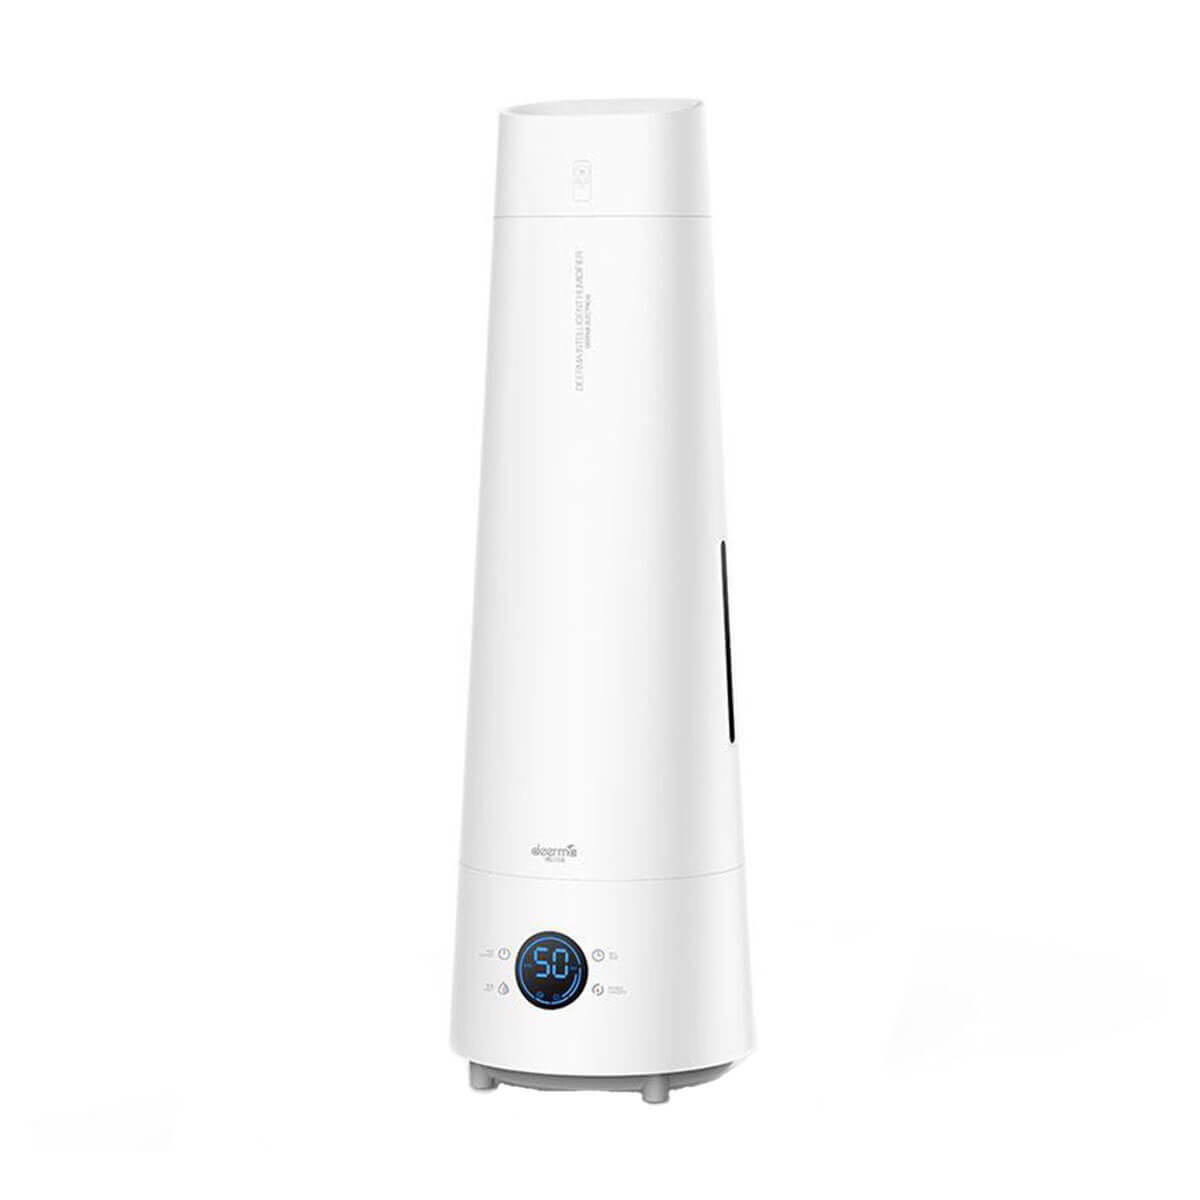 Xiaomi Deerma Humidifier 4L with Remote Control White (DEM-LD220) (SN022202020021427) - Как новый